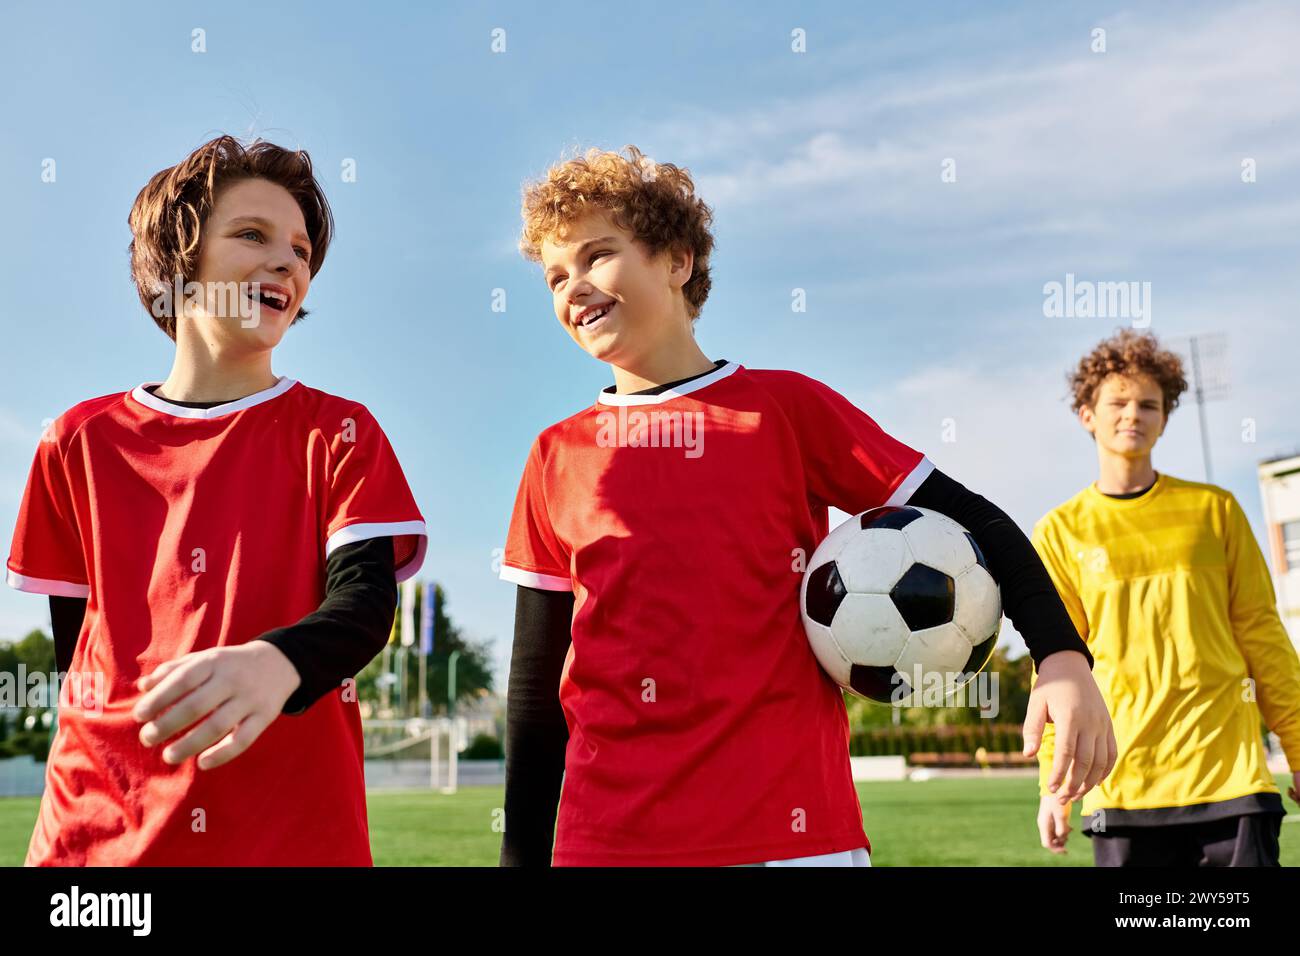 A group of young men stand next to each other on a soccer field, showcasing a sense of camaraderie and teamwork as they prepare for the game ahead. Stock Photo